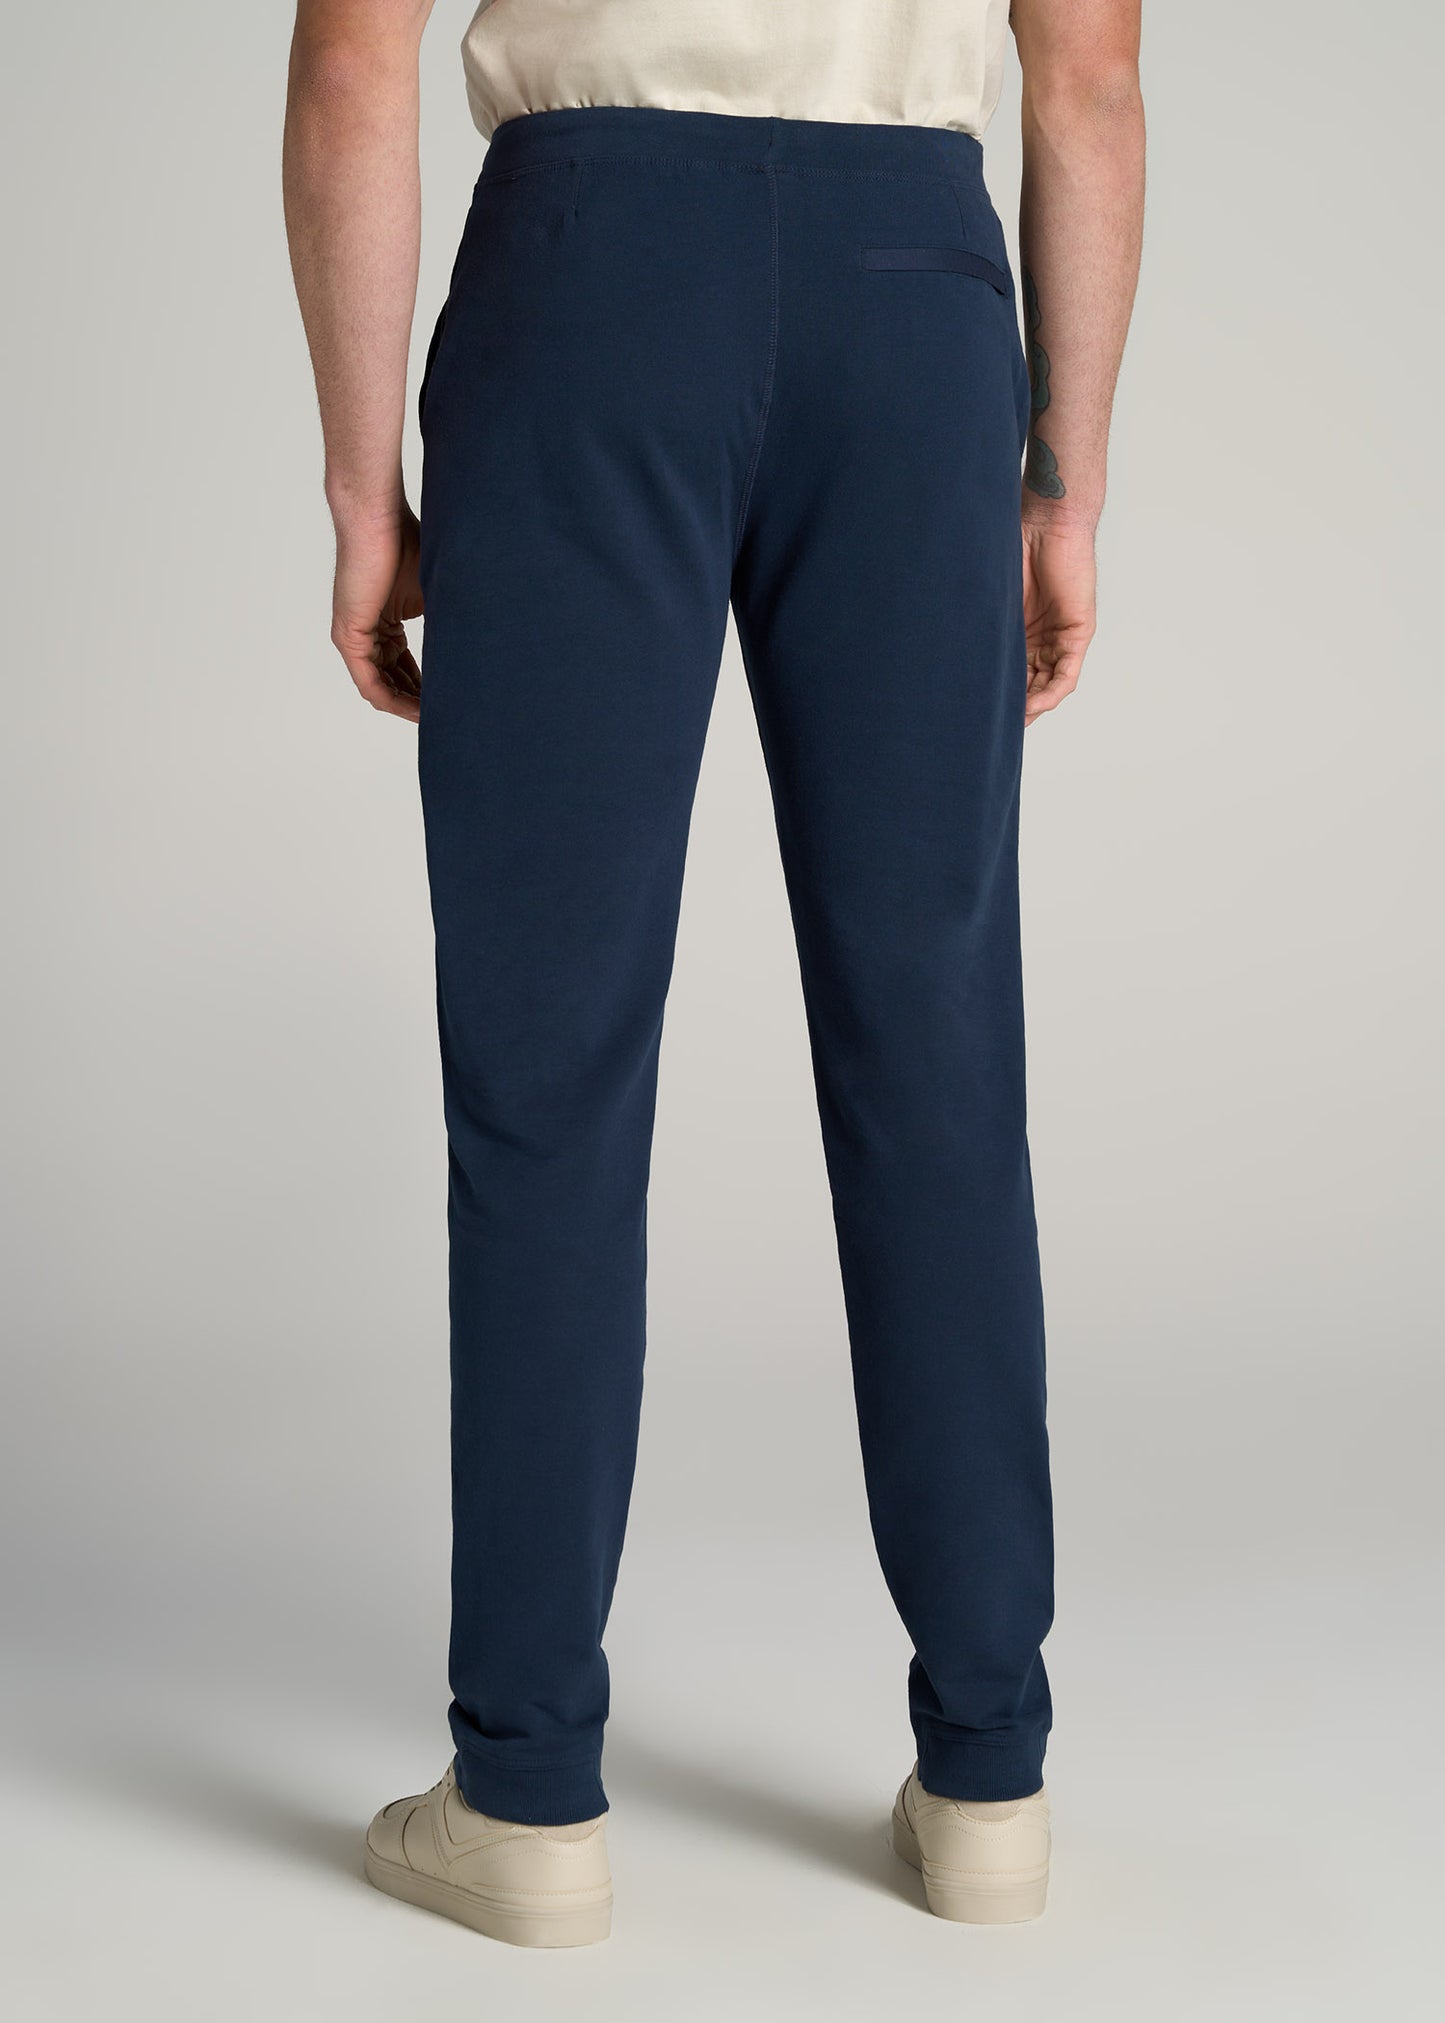    American-Tall-Men-Microsanded-French-Terry-Sweatpant-Marine-Navy-back